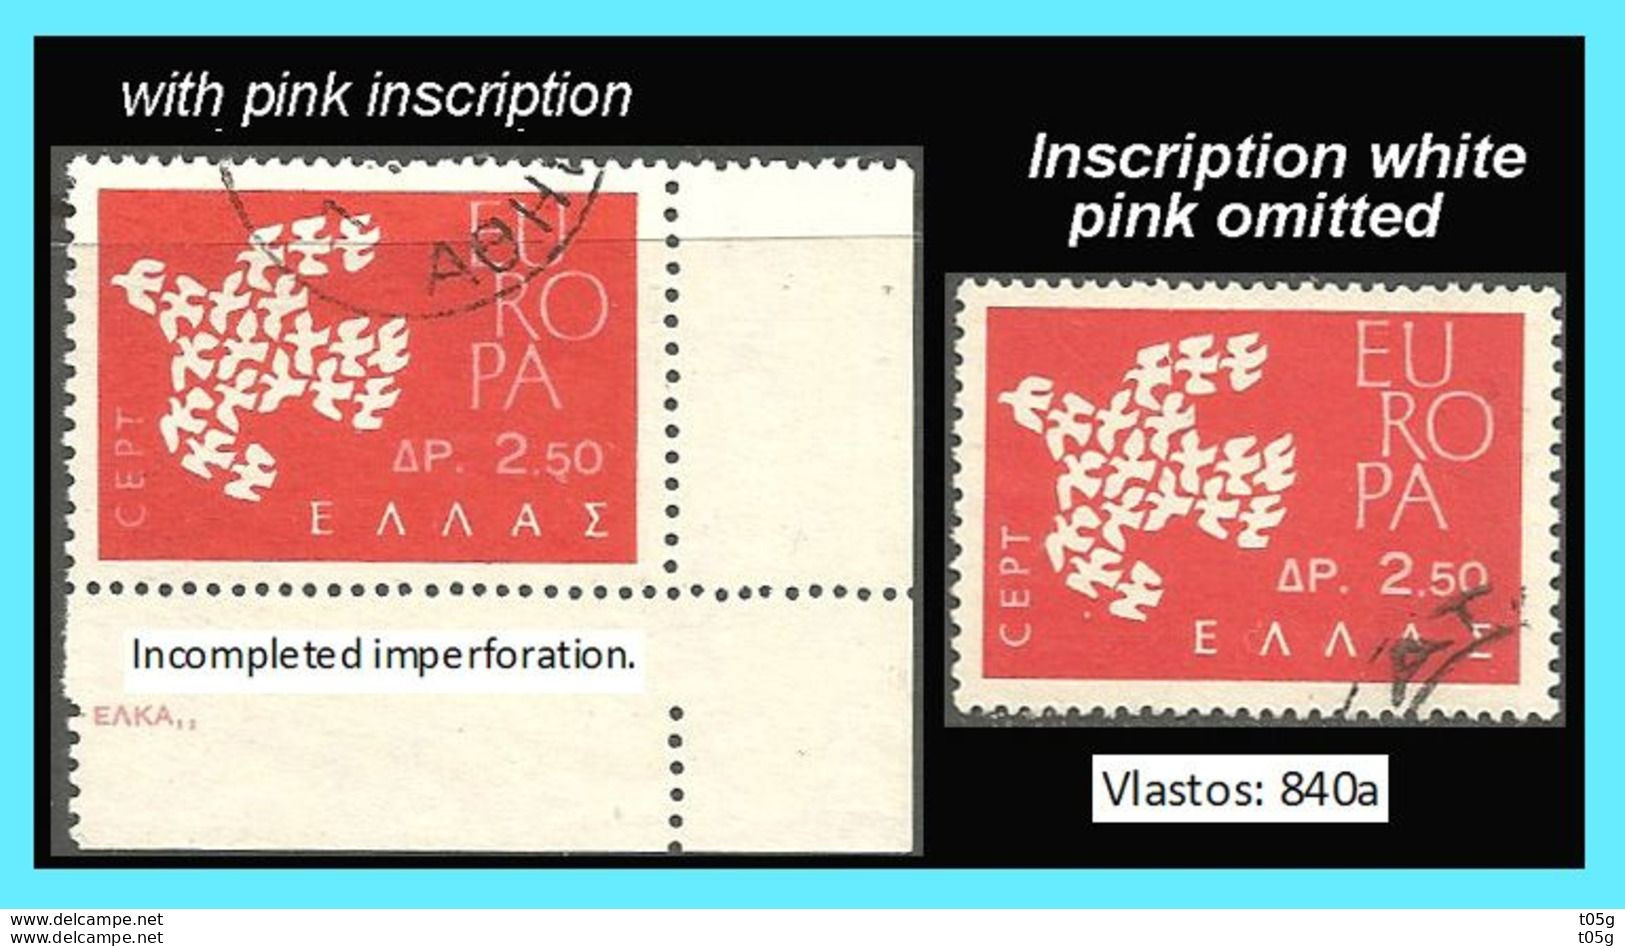 GREECE-GRECe - HELLAS -EUROPA CEPT 1961: 2.50drx Inscription White, Pink Omitted Used - Usados